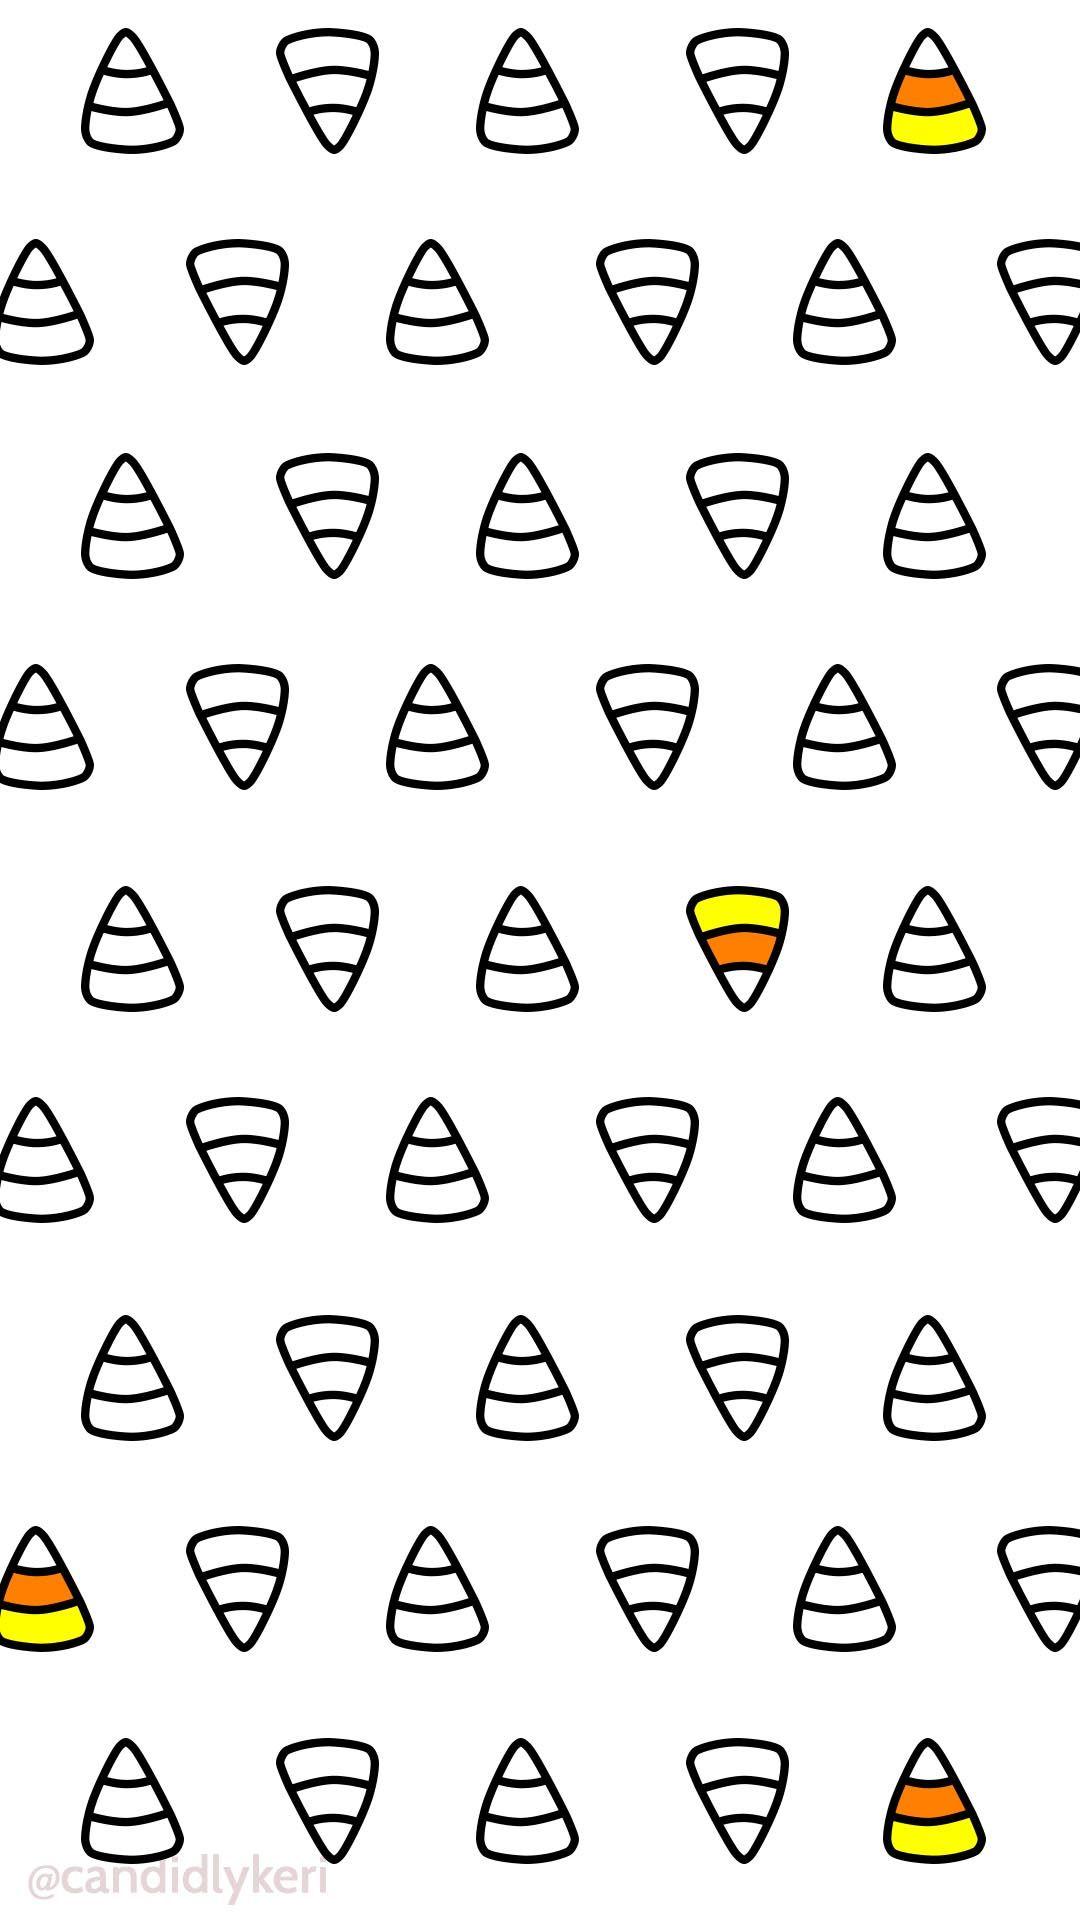 Cute Halloween Candy Corn October 2016 wallpaper you can download for free on the blog! Fo. Halloween wallpaper iphone, Halloween wallpaper, Wallpaper iphone cute